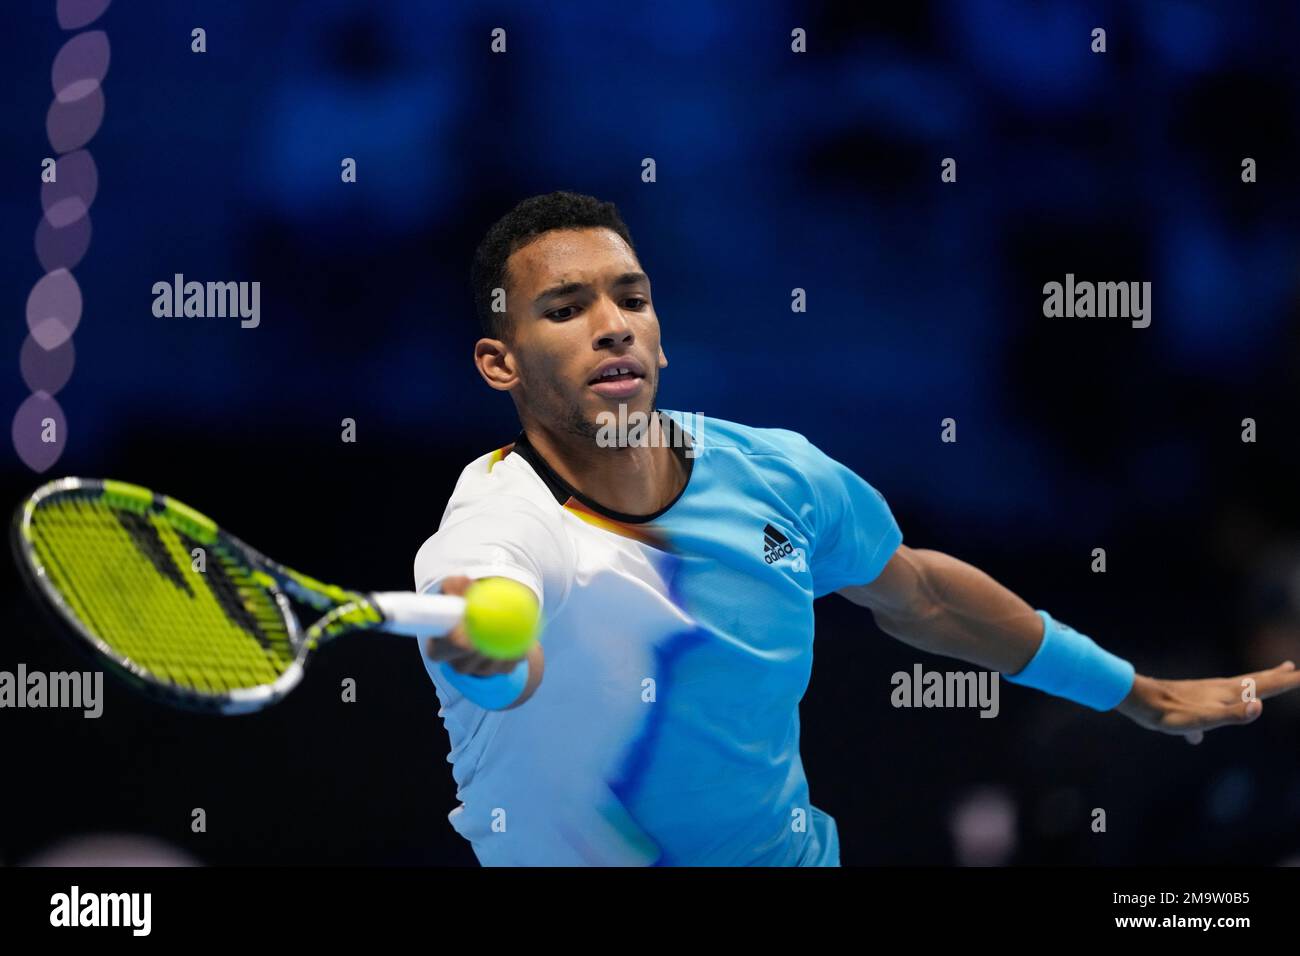 Canadas Felix Auger-Aliassime returns the ball to United States Taylor Fritz during their singles tennis match of the ATP World Tour Finals, at the Pala Alpitour in Turin, Italy, Thursday, Nov